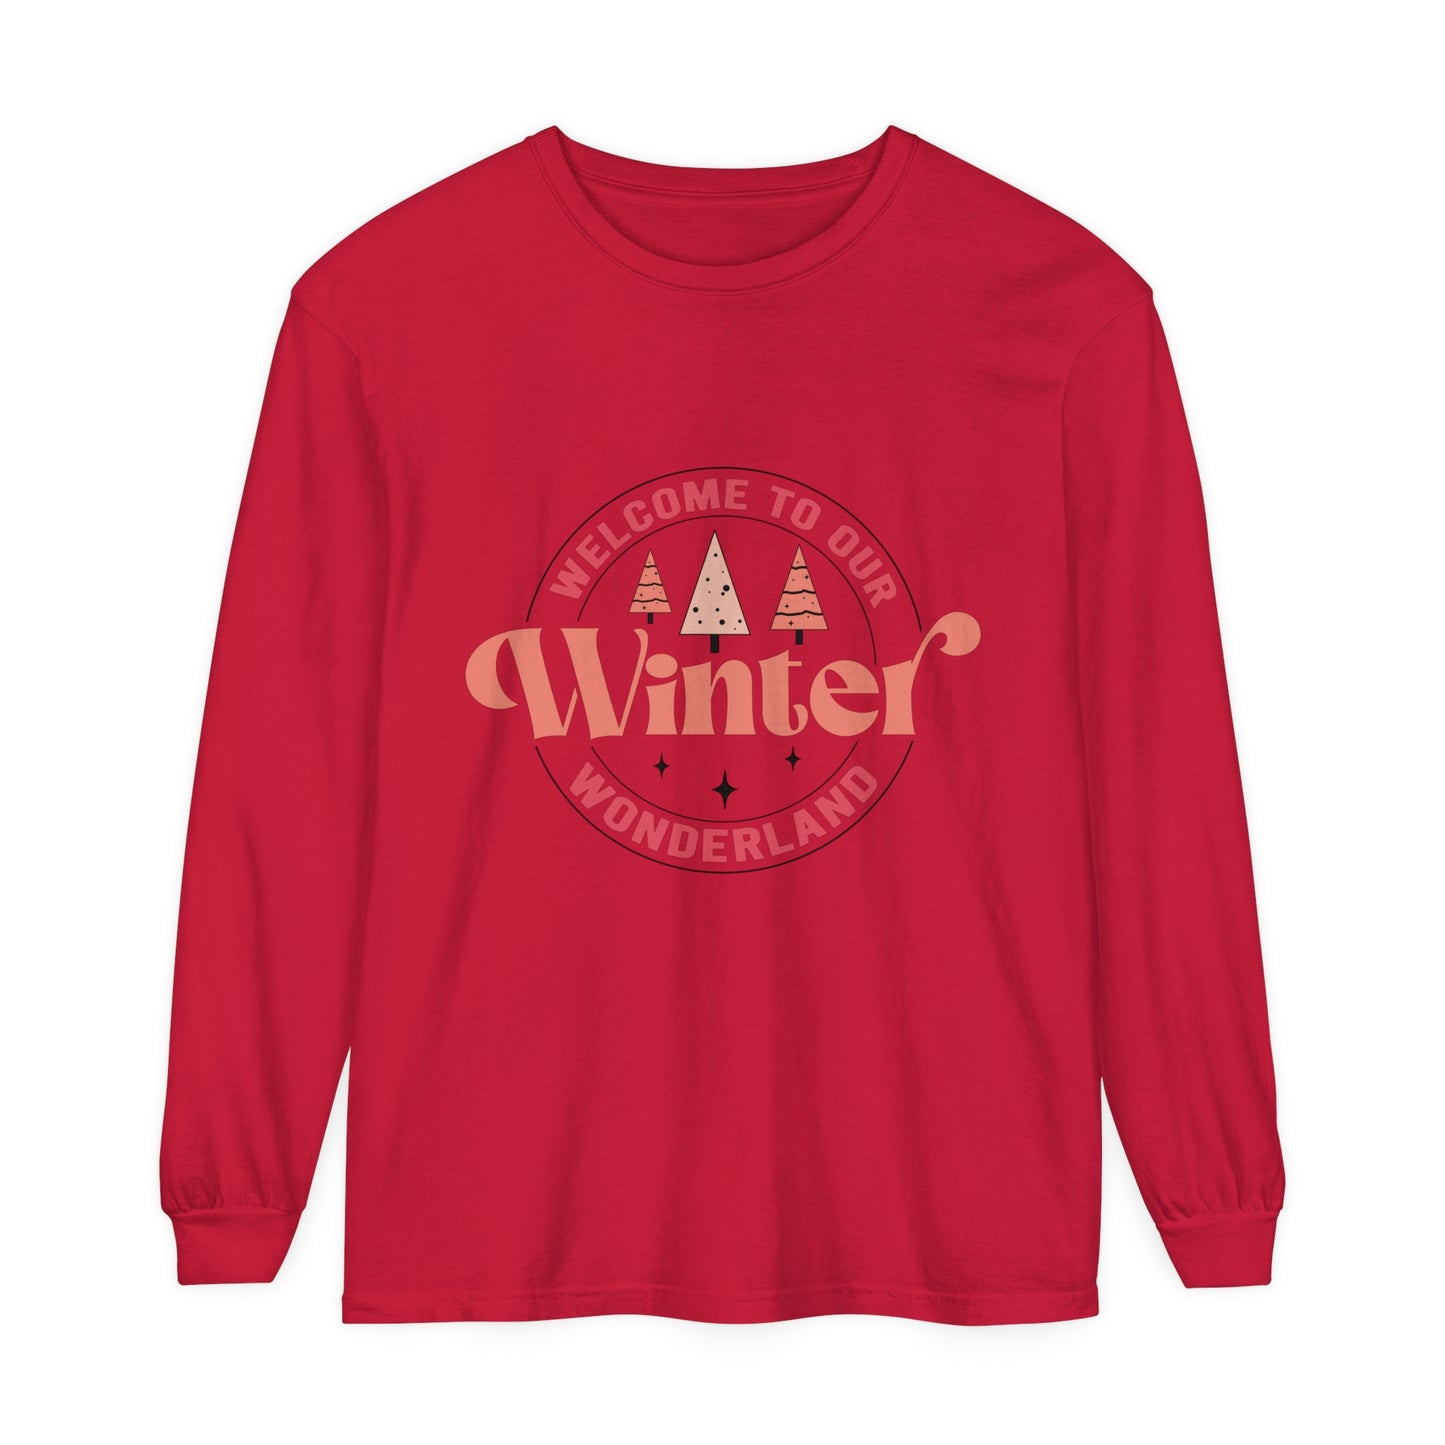 Welcome to our winter wonderland Women's Christmas Holiday Loose Long Sleeve T-Shirt